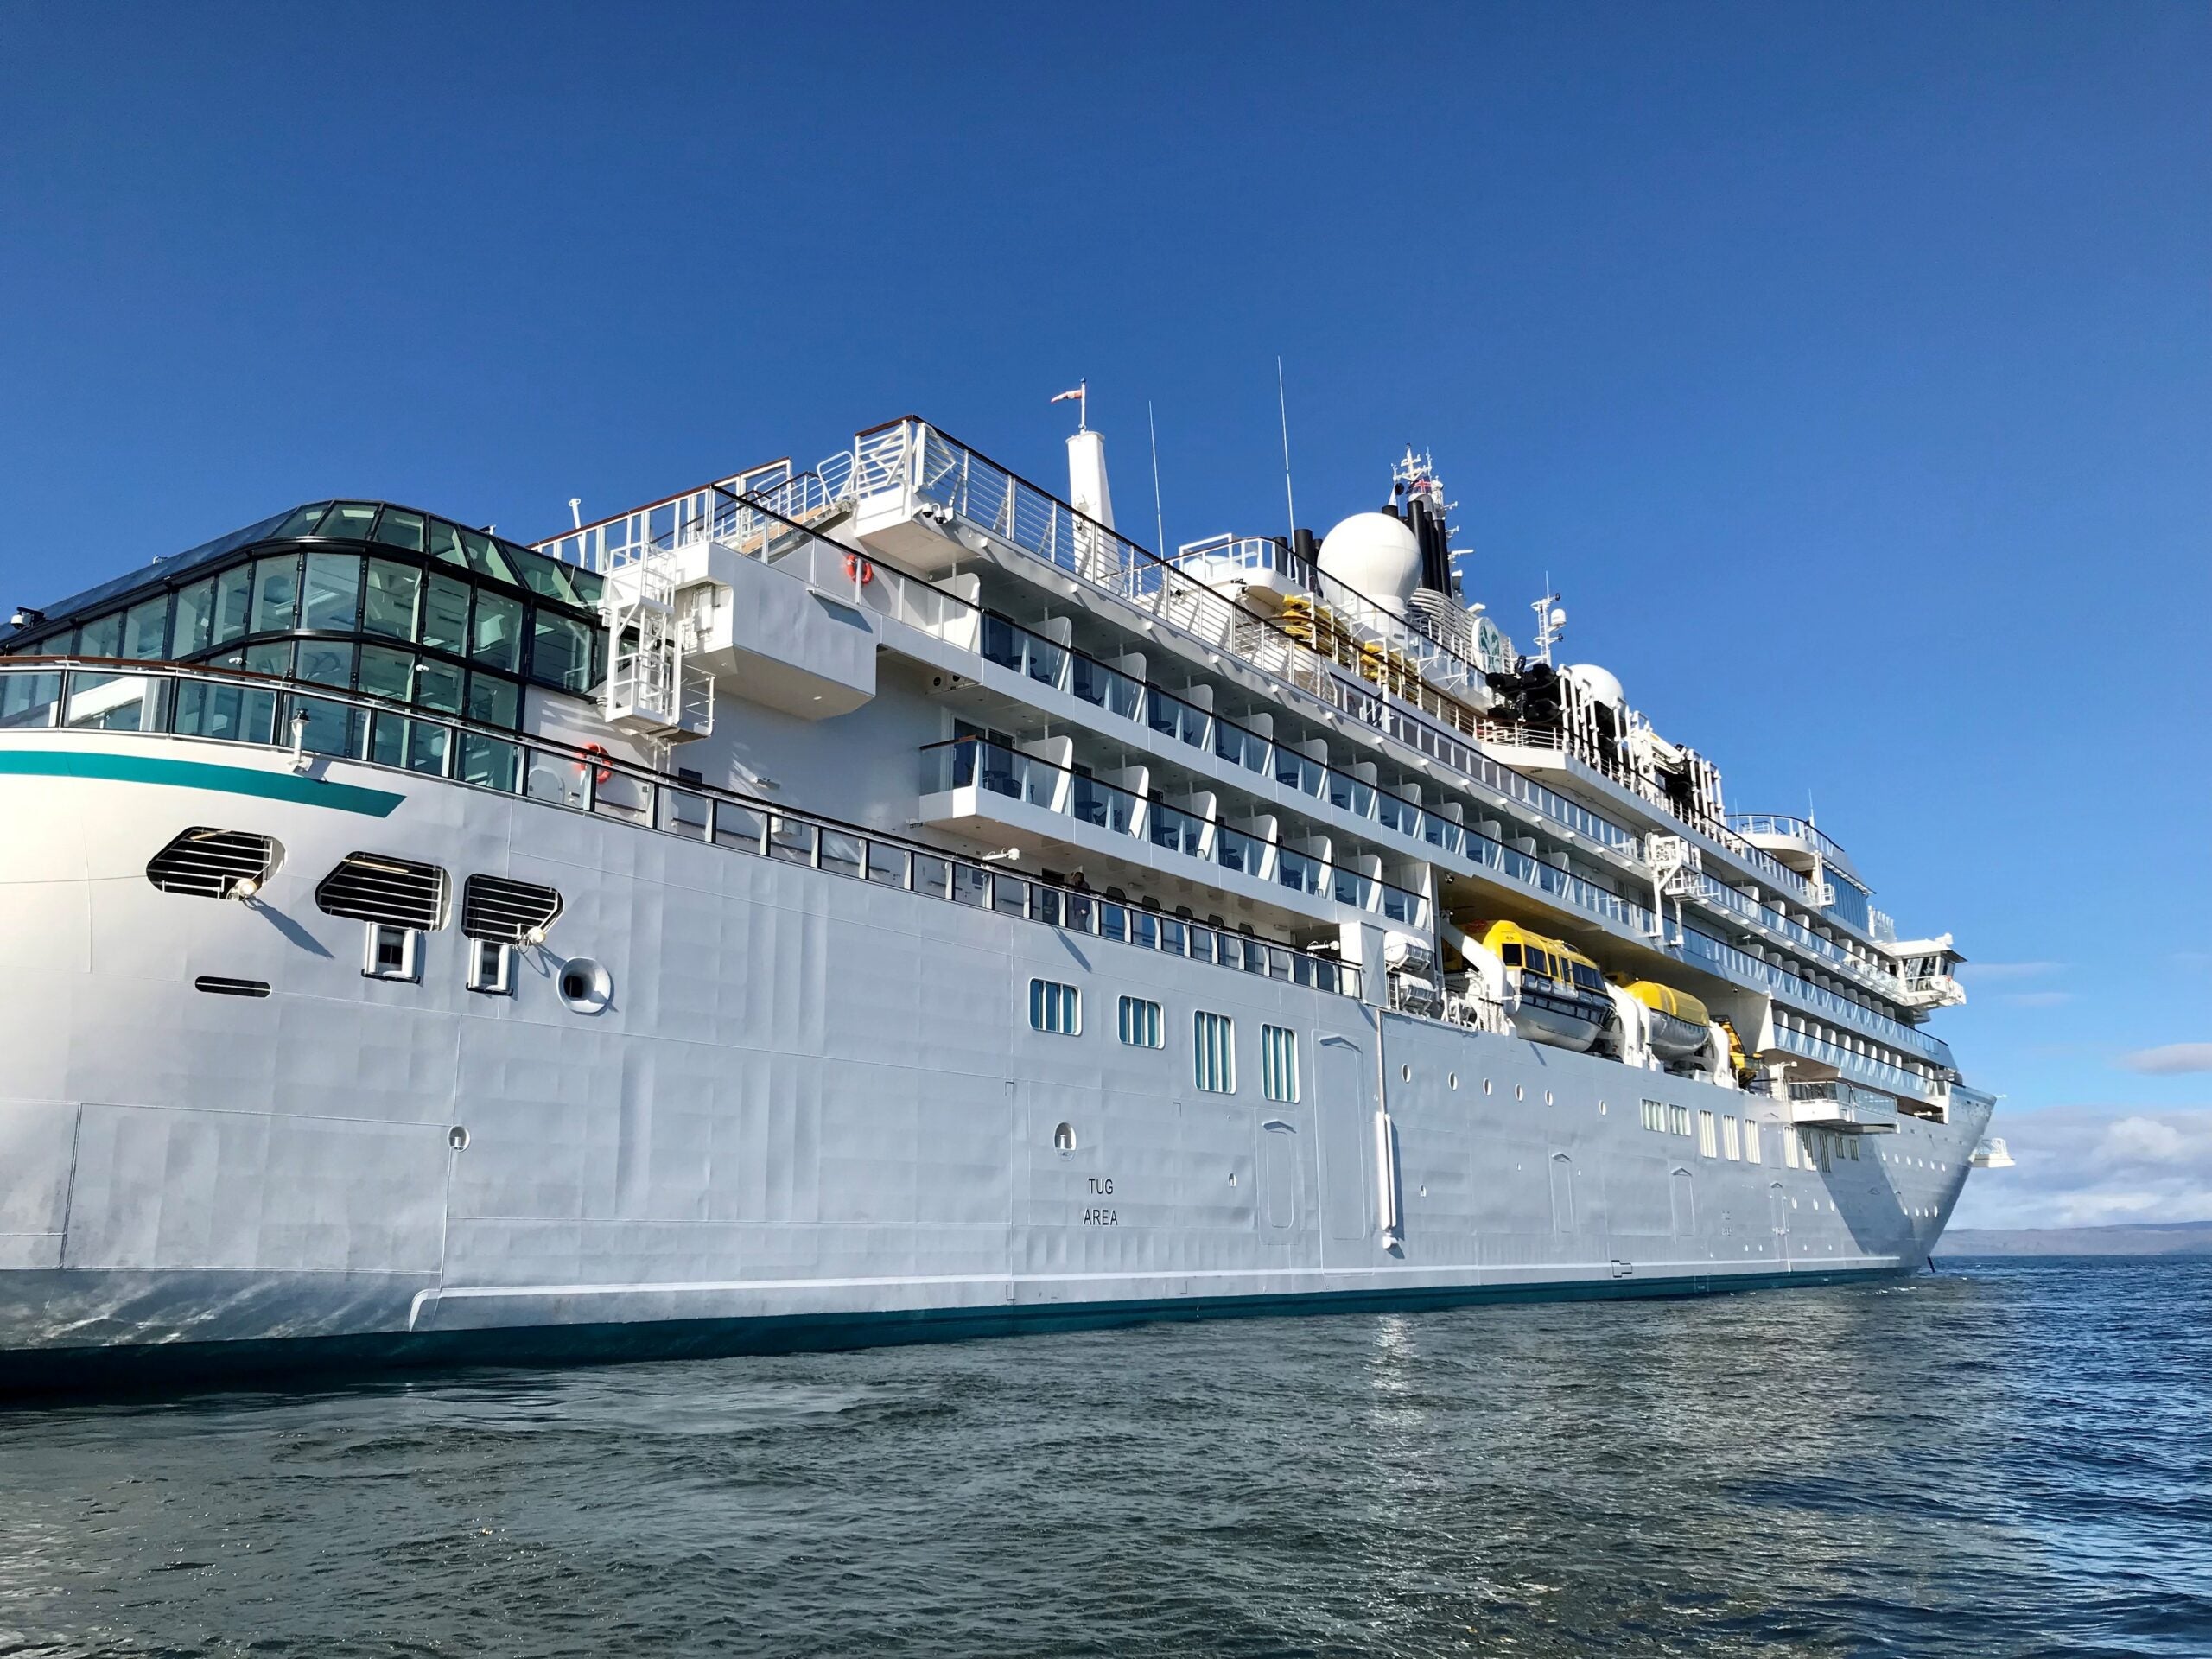 First look: Crystal Endeavor, the stylish new expedition cruise ship from luxury line Crystal Cruises